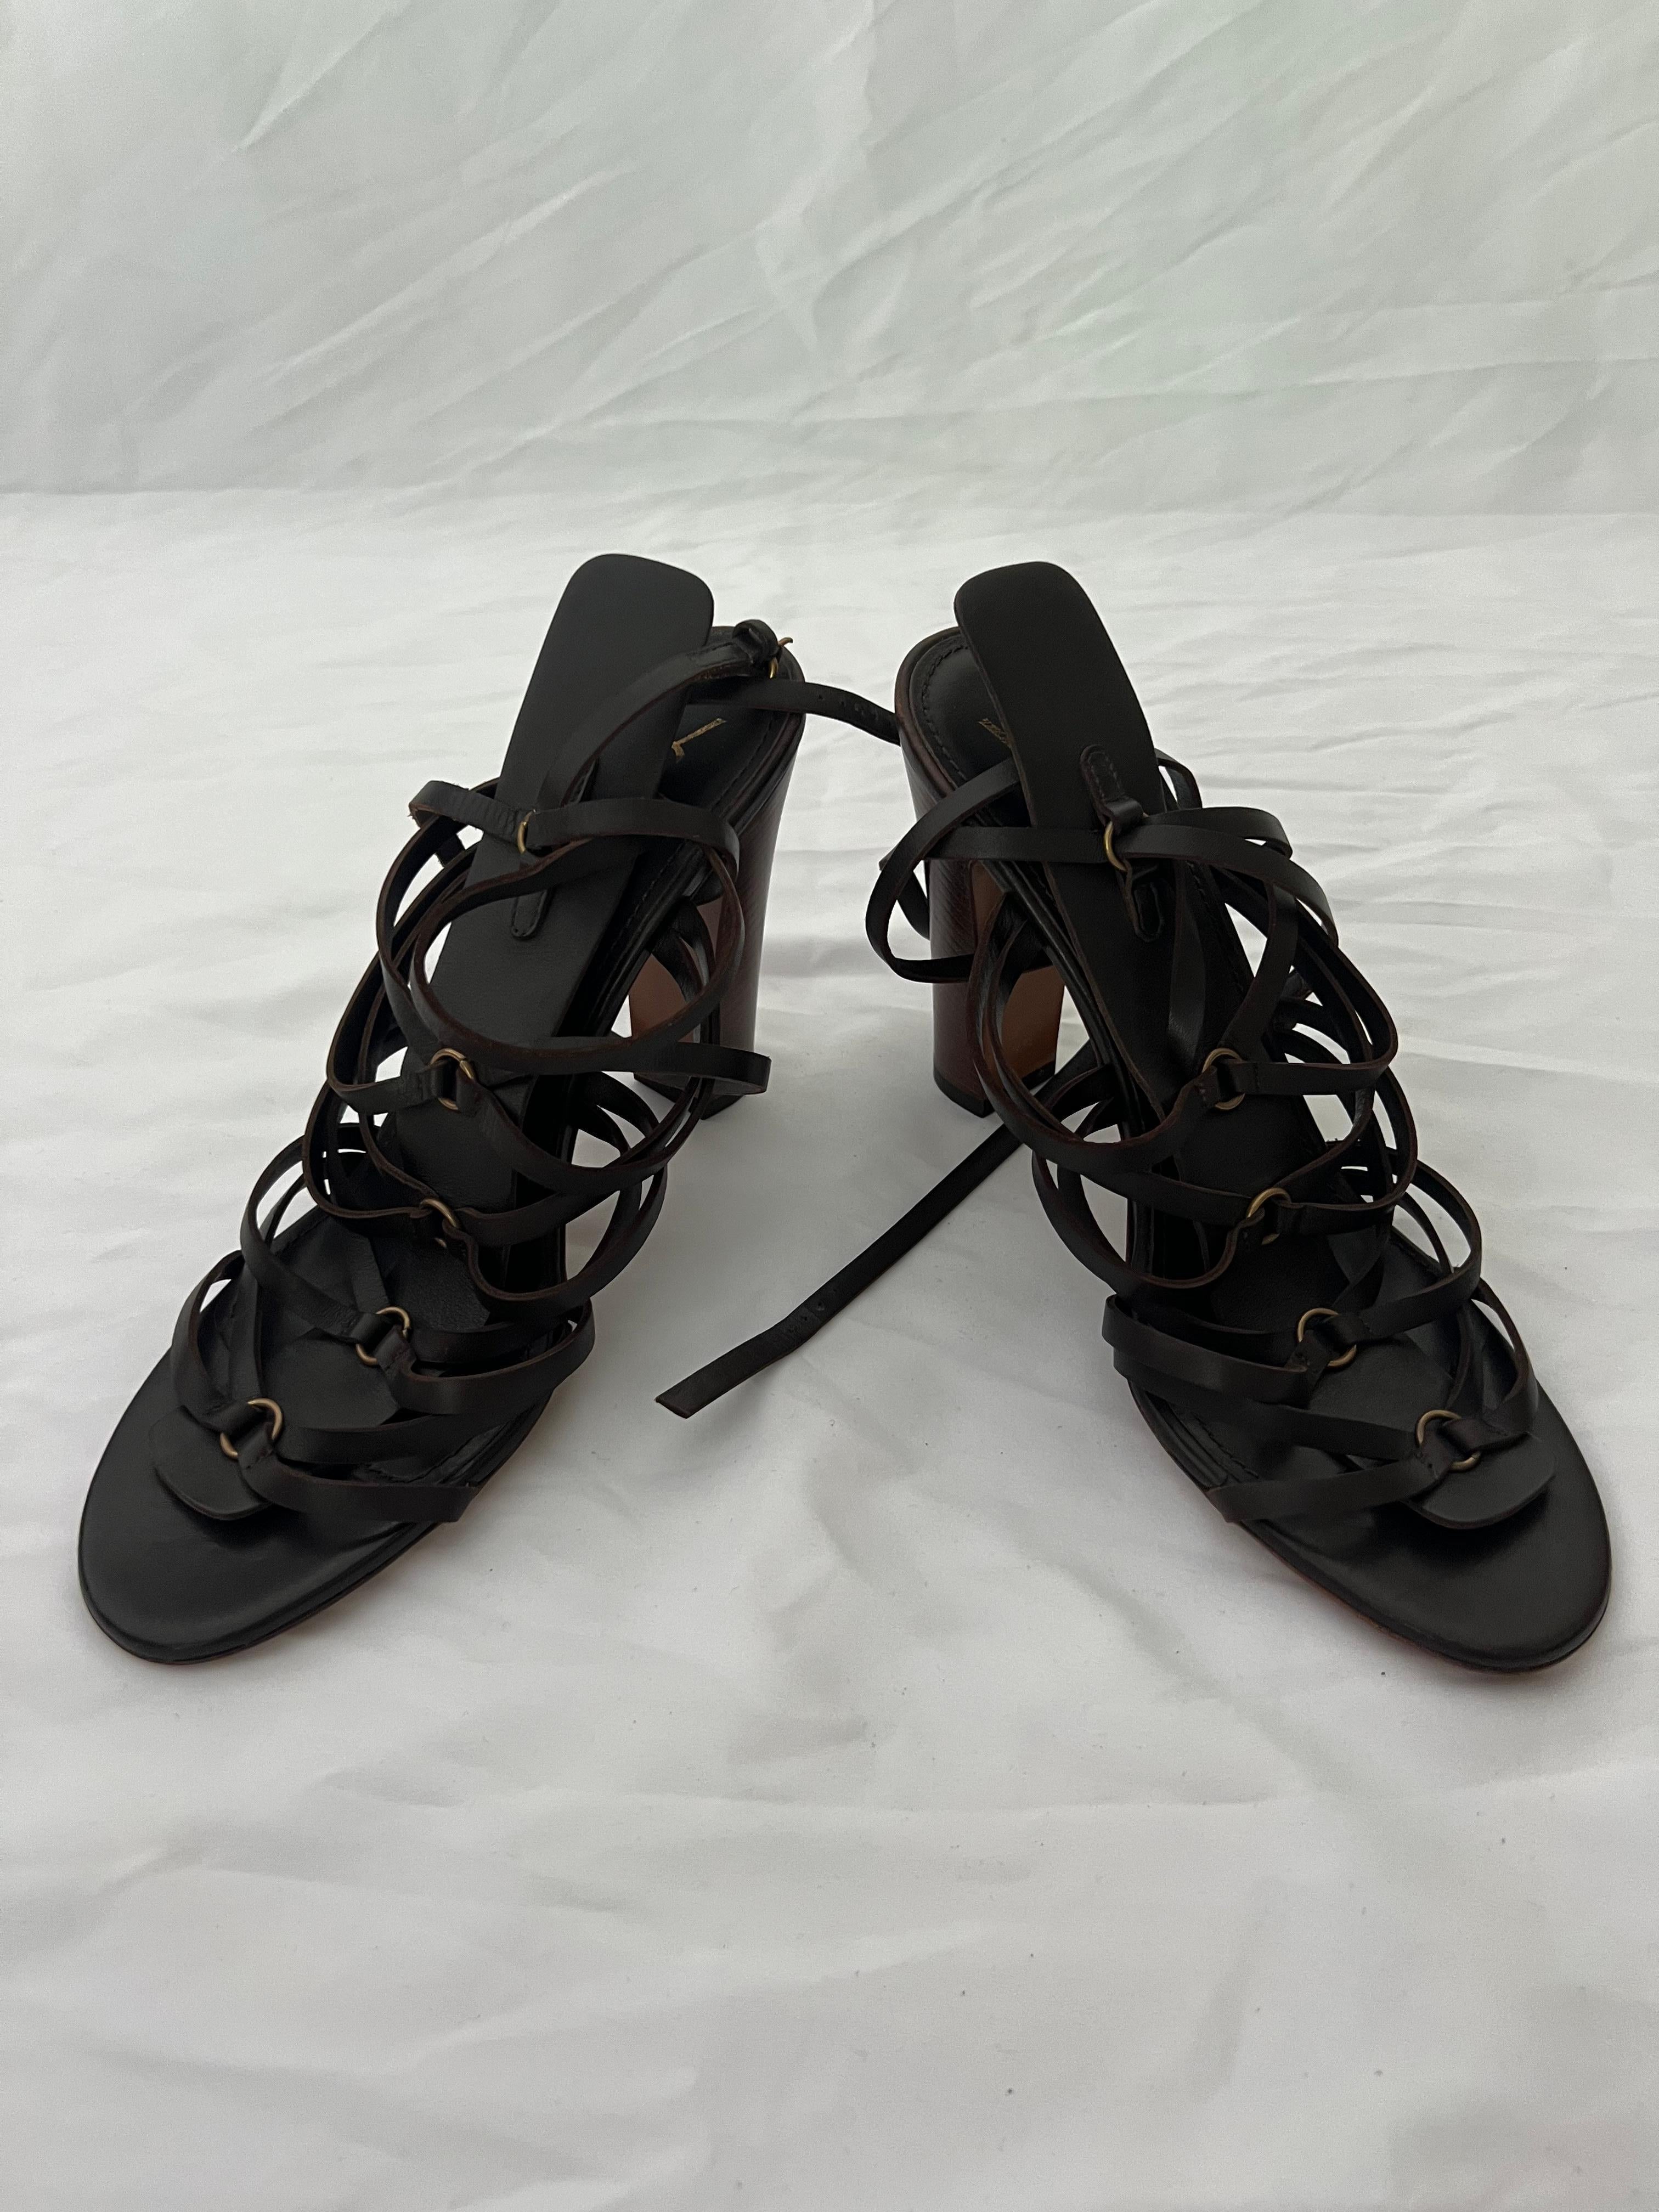 Yves Saint Laurent Rive Gauche Brown Leather Sandals, Size 41 In New Condition For Sale In Beverly Hills, CA